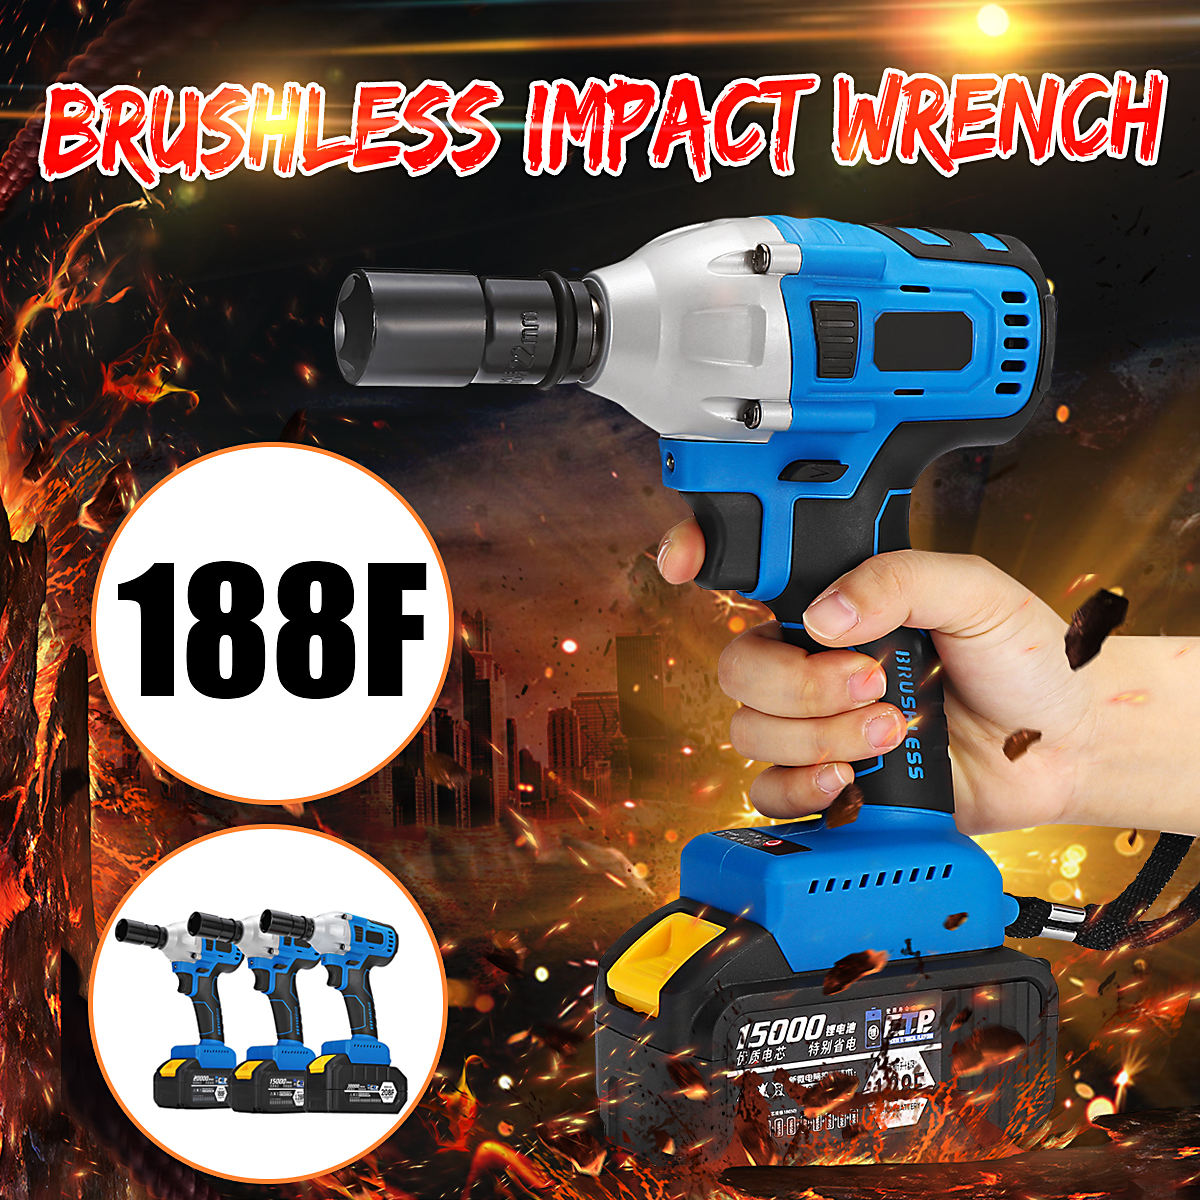 Electric-Screwdriver-Brushless-Cordless-Drill-Wireless-Electric-Wrench-Impact-Power-Tools-With-2-Bat-1380494-3